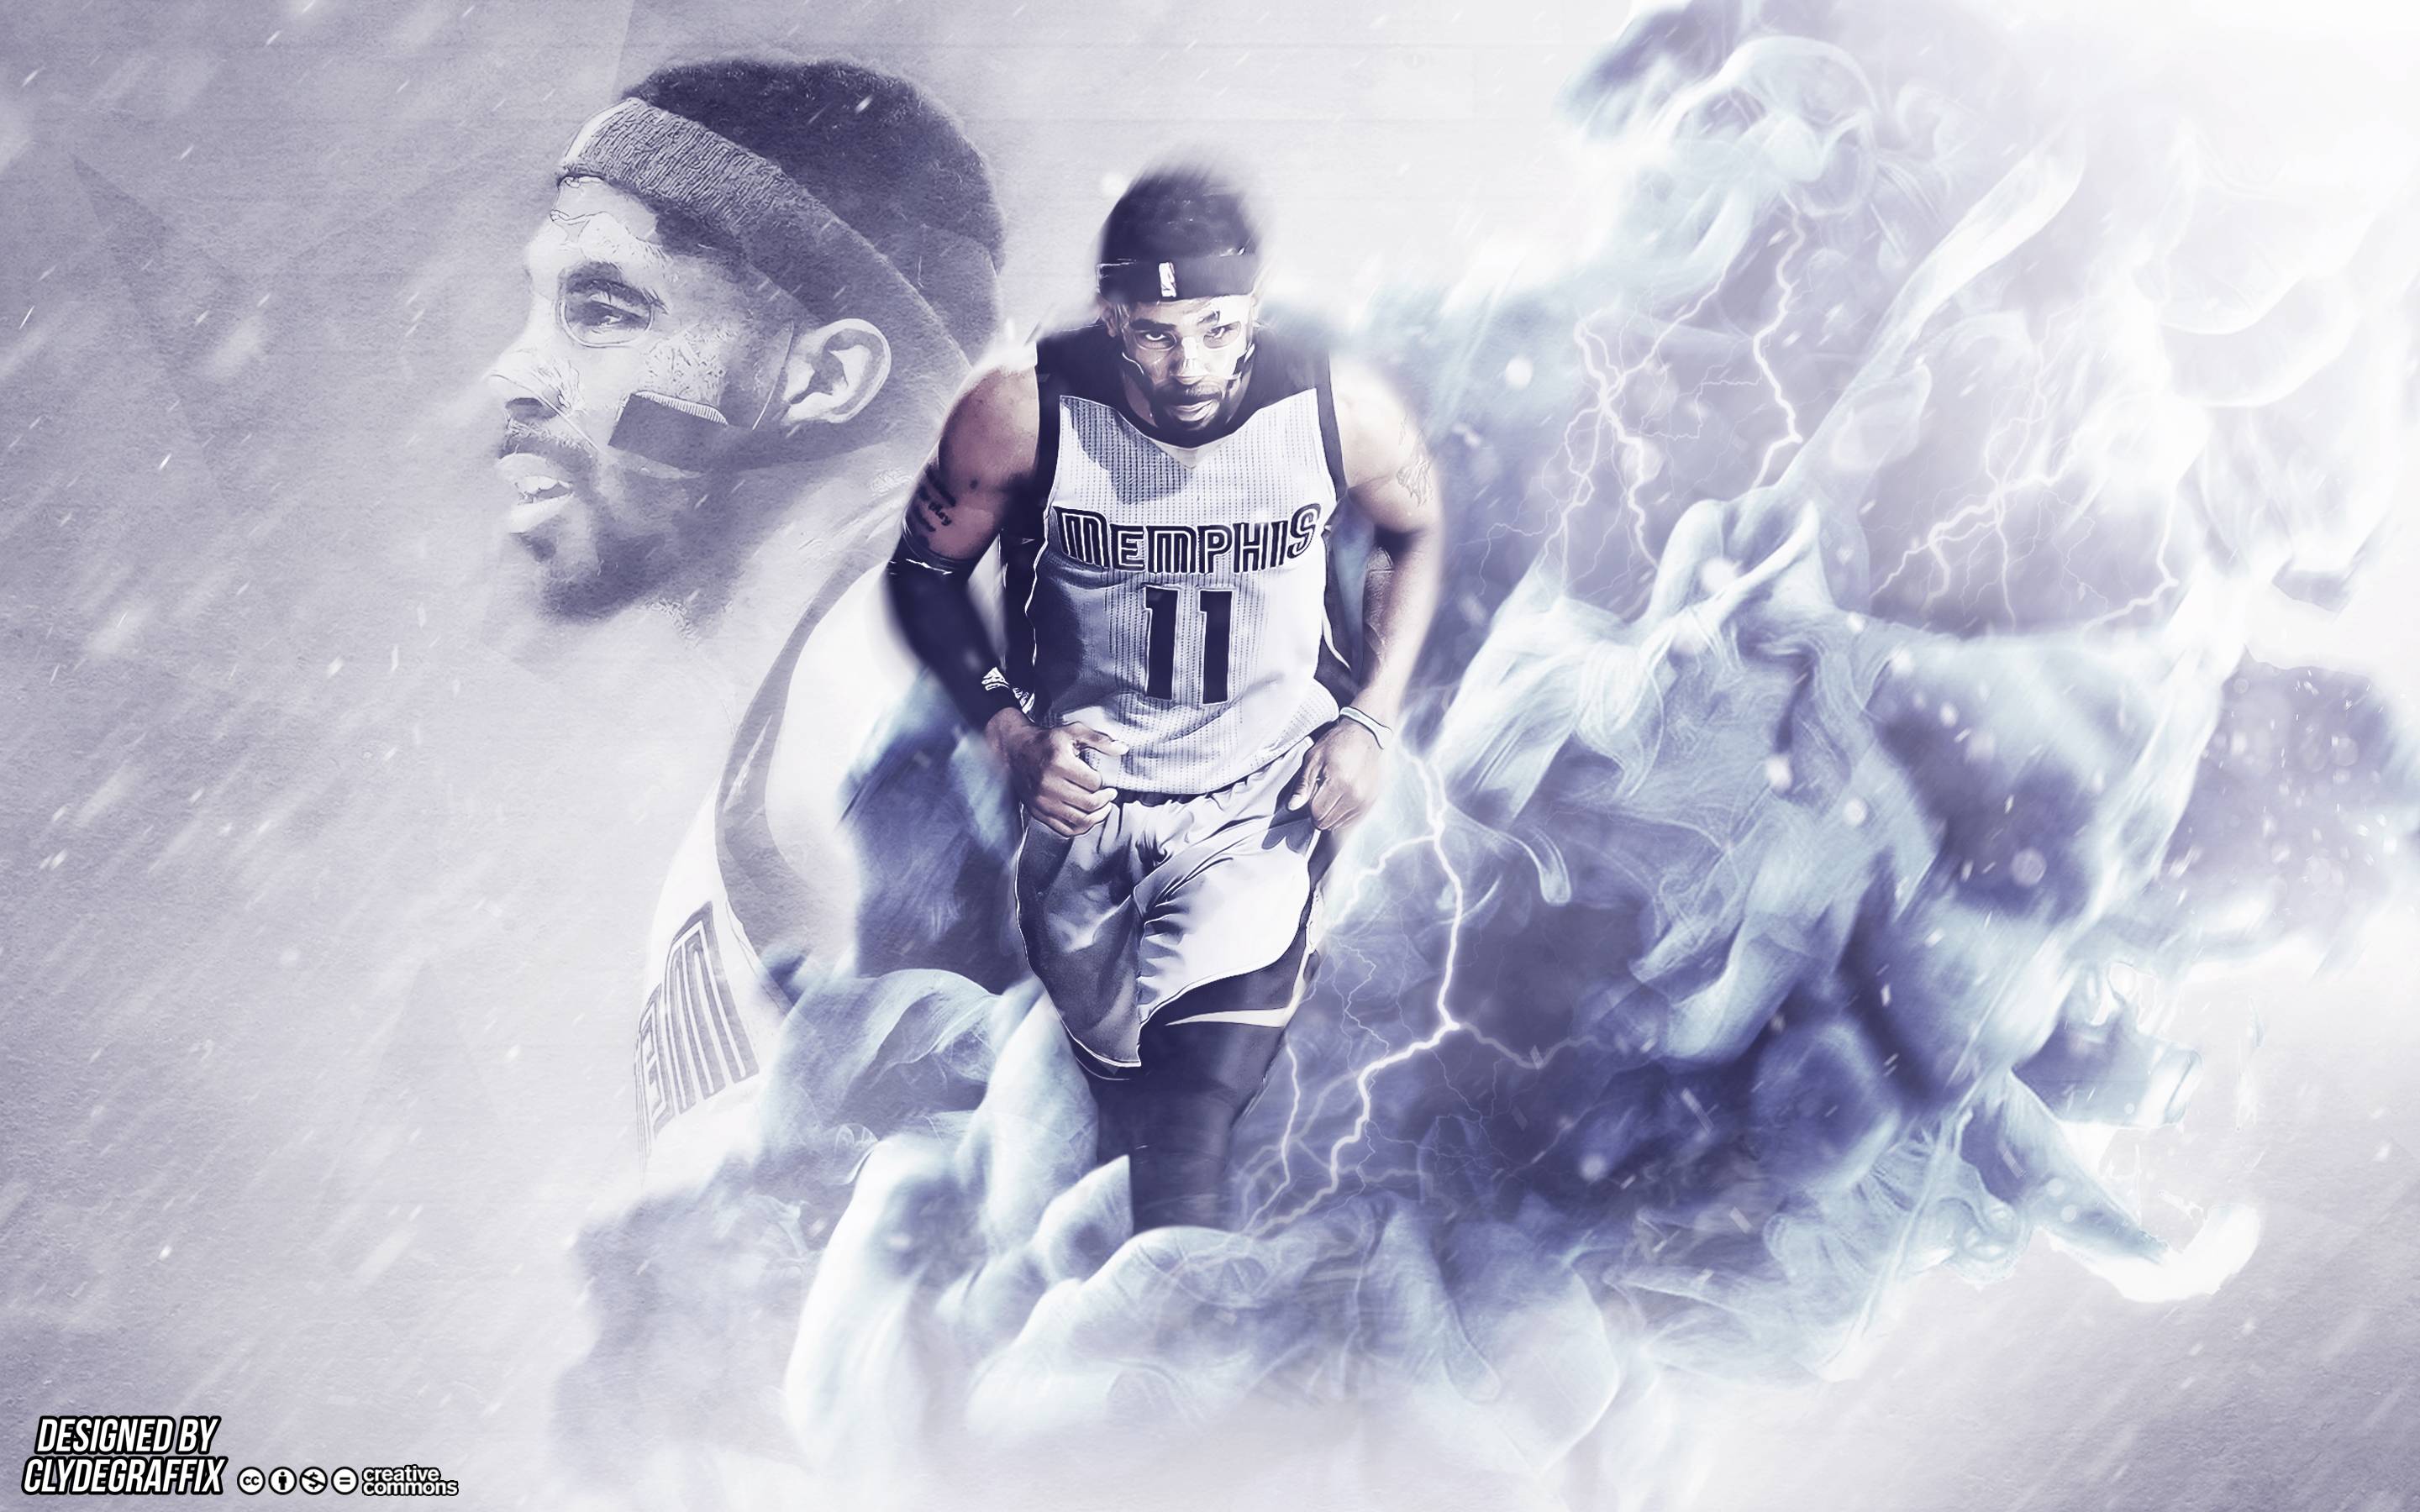 Check out my Mike Conley wallpaper that I made and let me know what